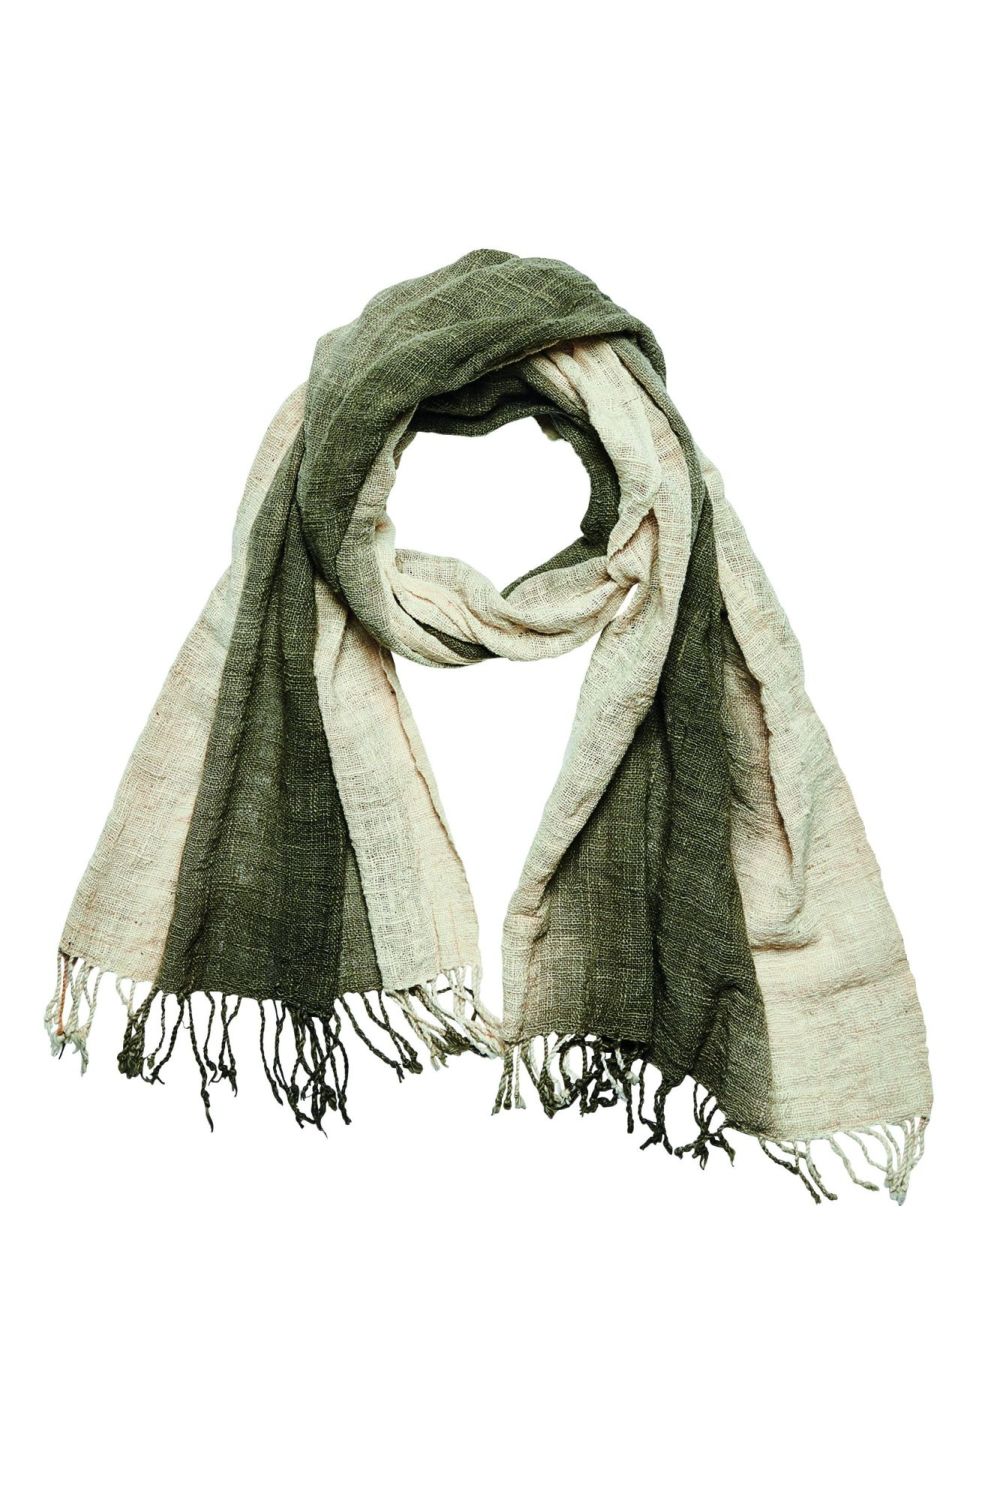 Women's hand-woven, ombre plant dyed cotton scarf